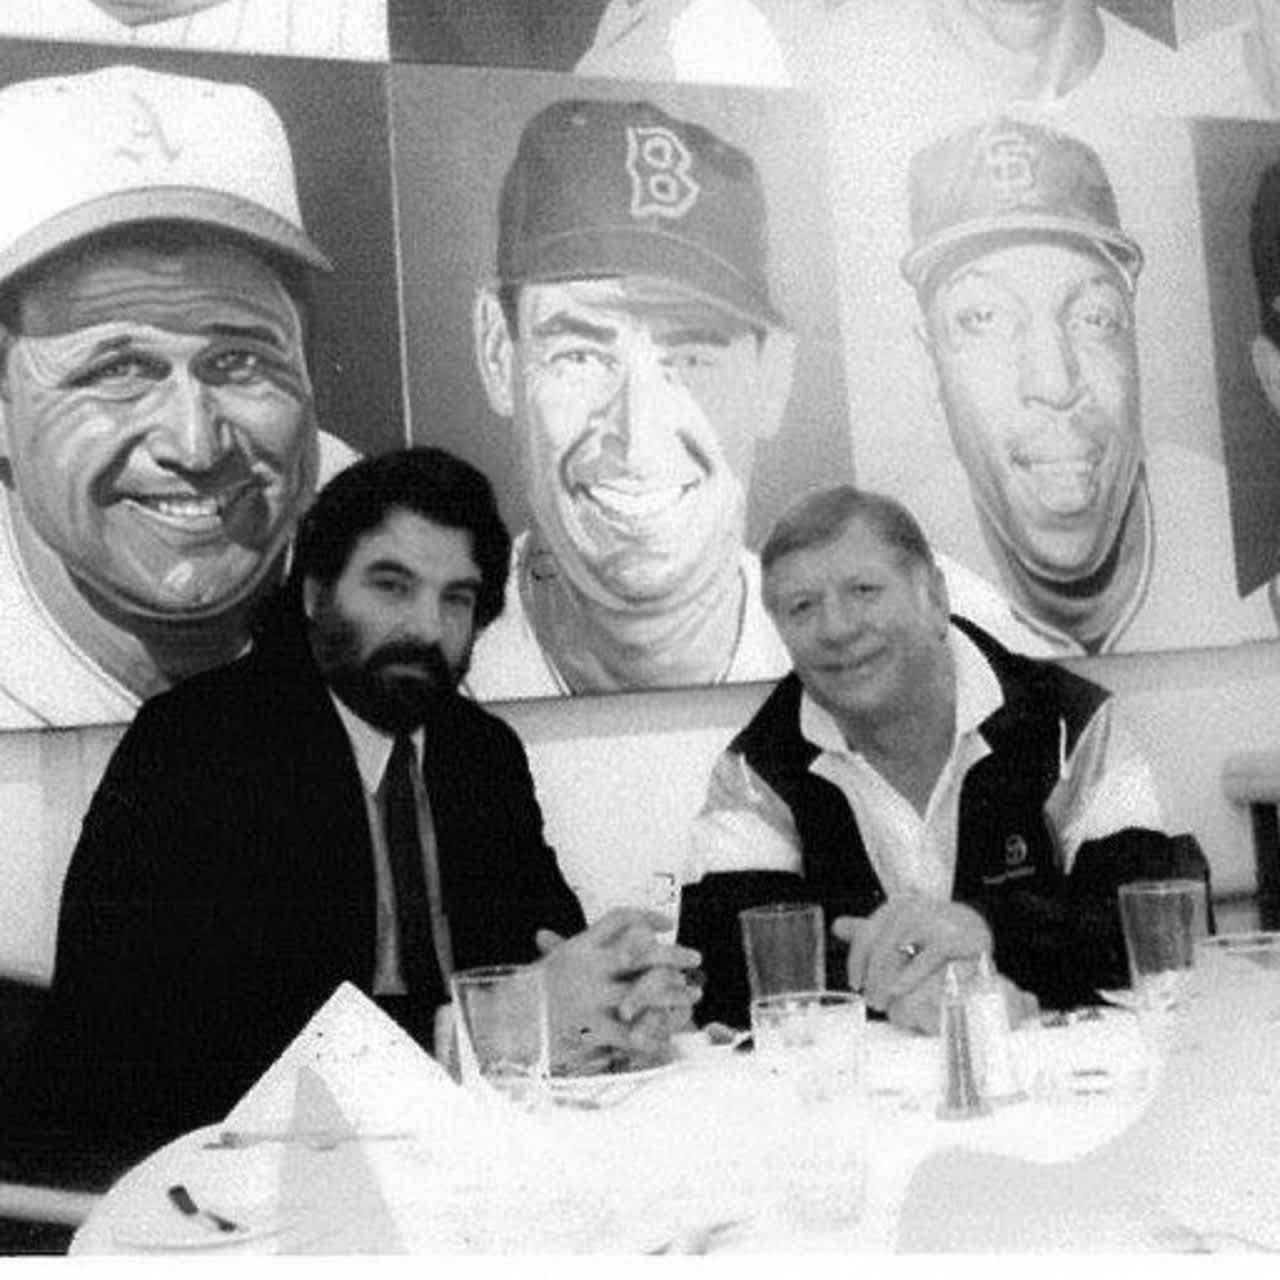 Molito, left, with Mickey Mantle in his restaurant on Central Park West in 1990.